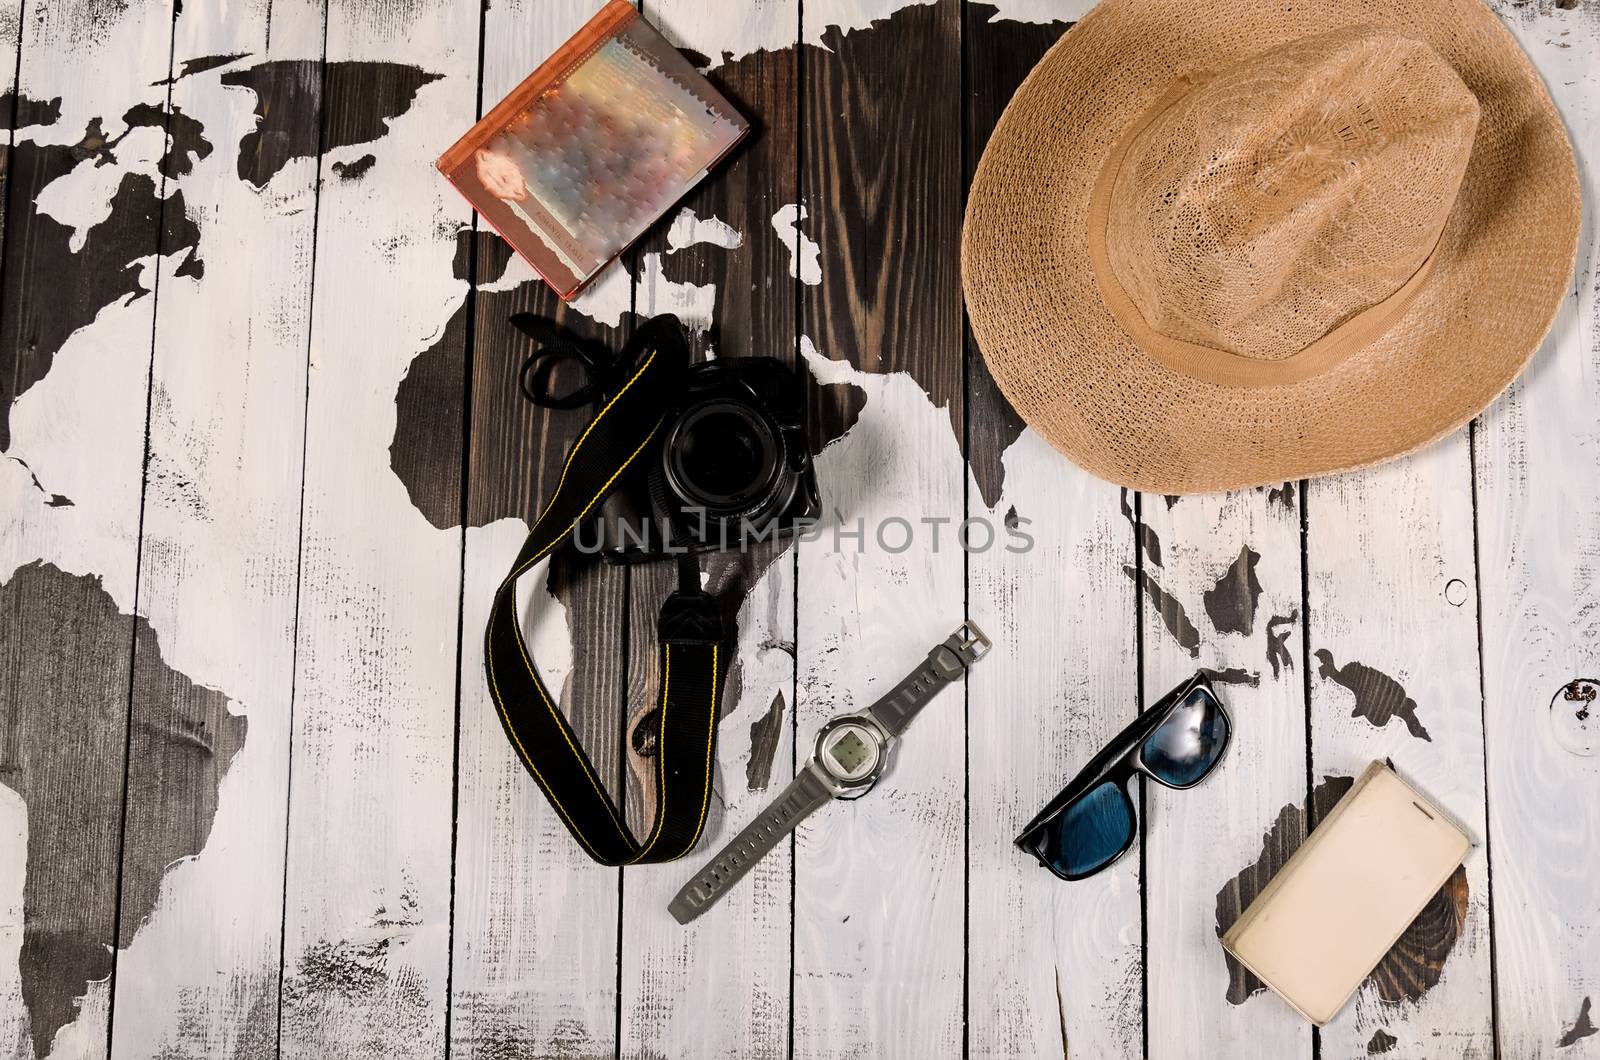 Table with open map showing plans for travelling and related items including watch smartphone sunglasses hat notebook and camera on wooden background with copyspace left